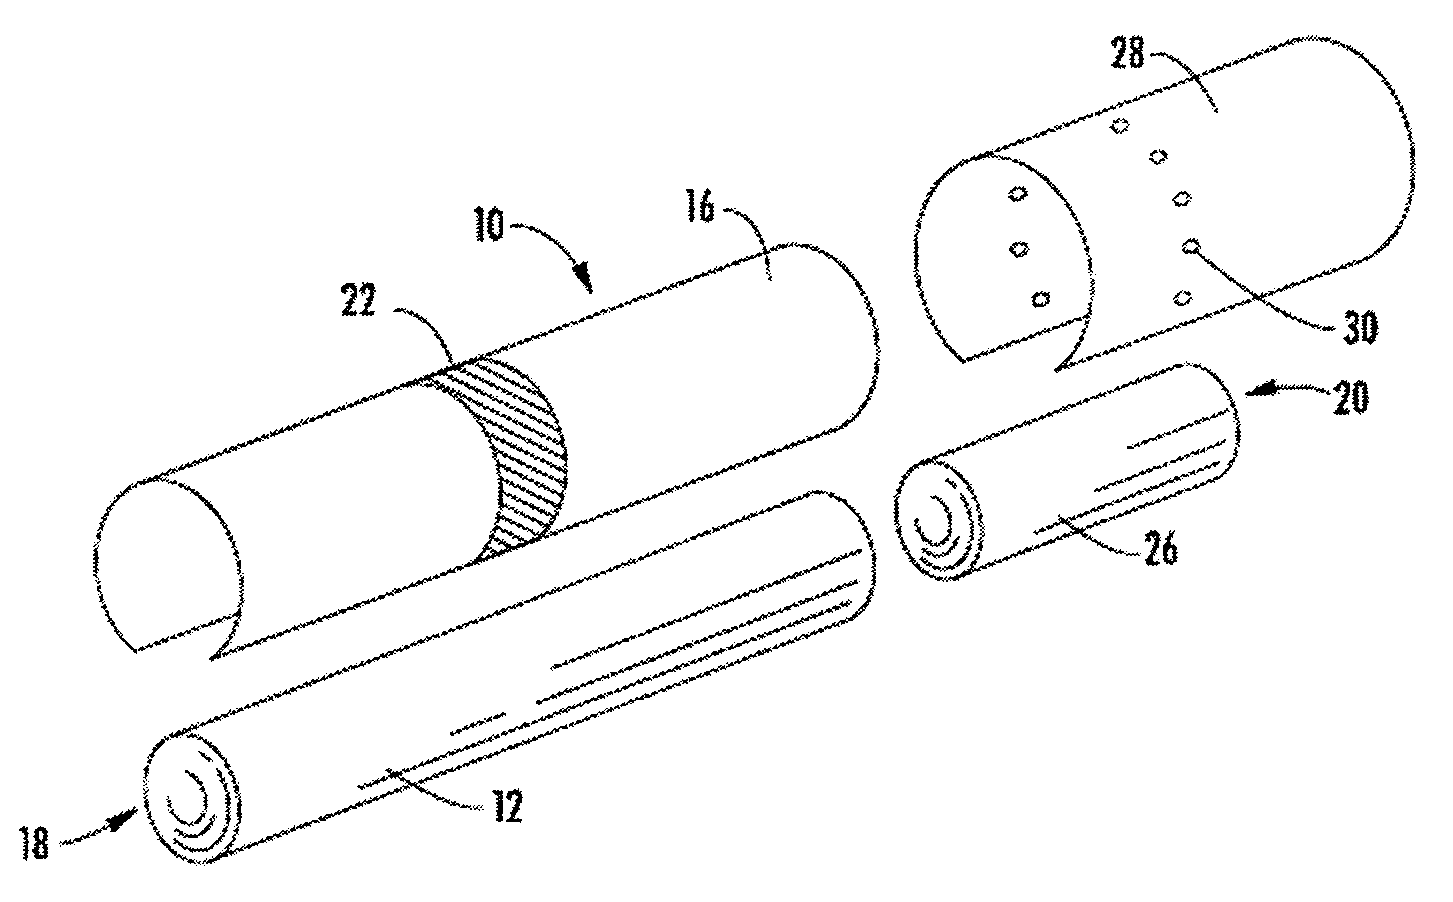 Apparatus for Forming a Filter Component of a Smoking Article, and Associated Method